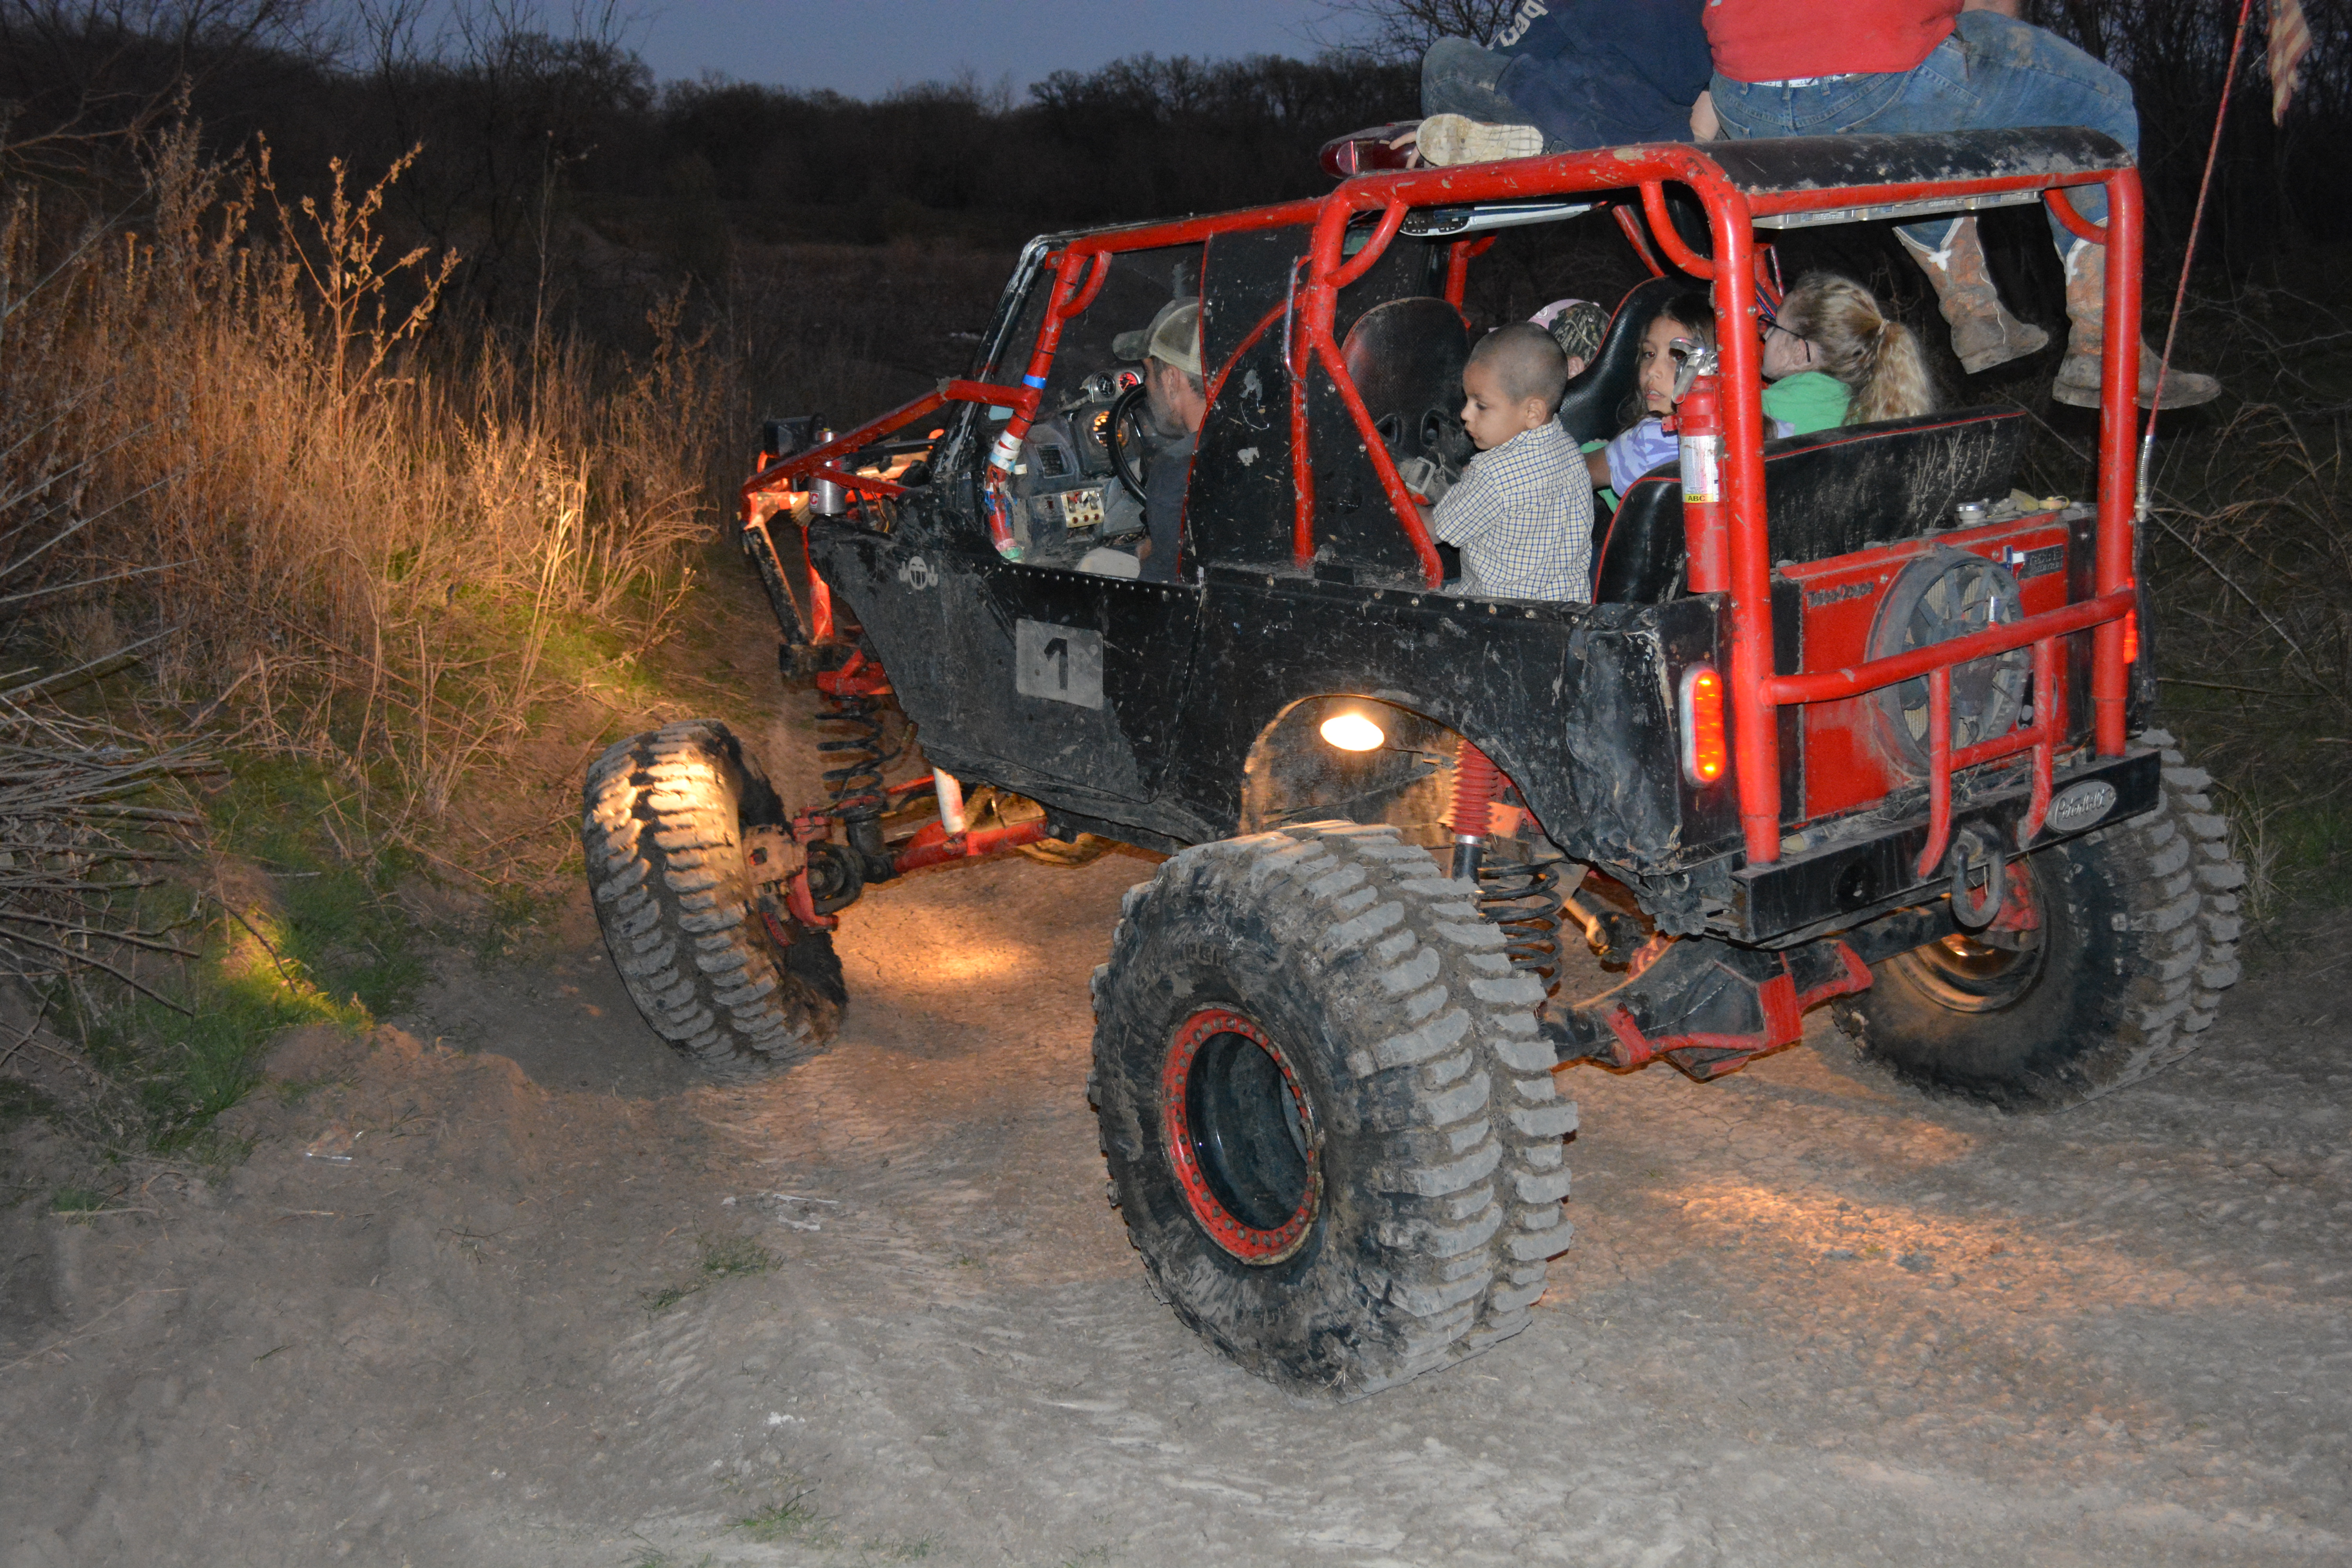 off-roading-in-texas